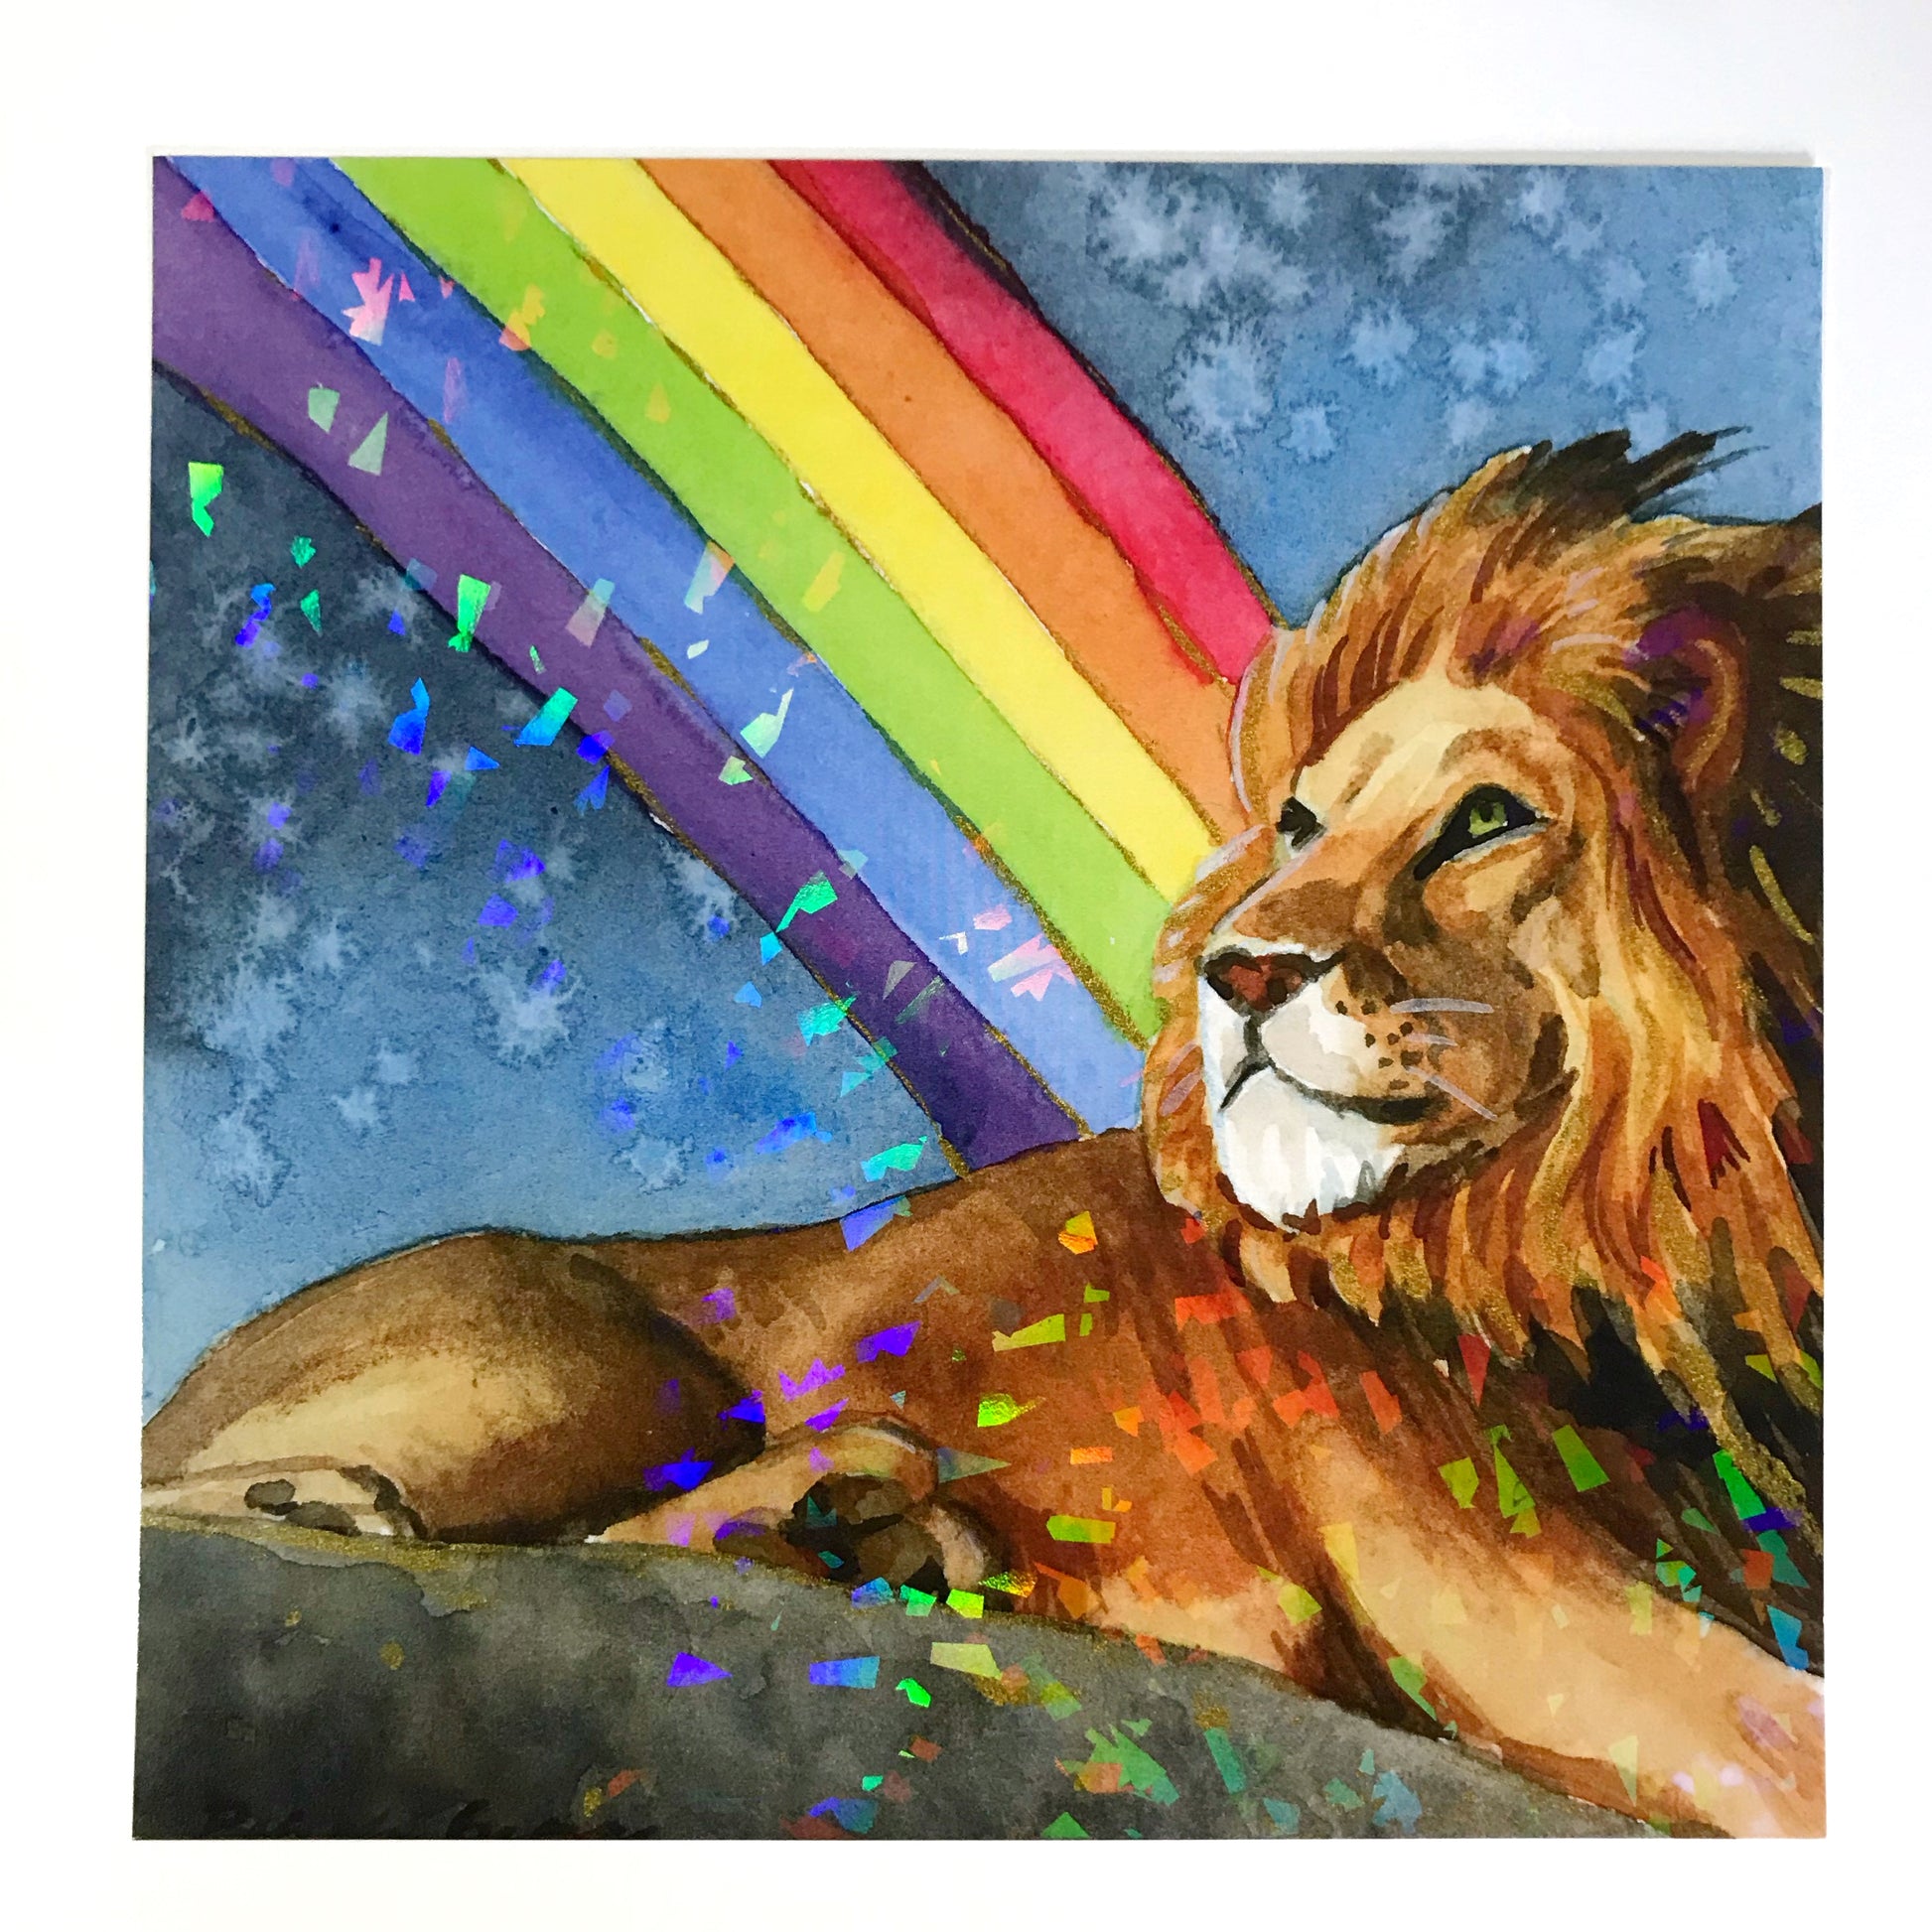 Holographic - End of the Rainbow - Priscilla George Fine Art